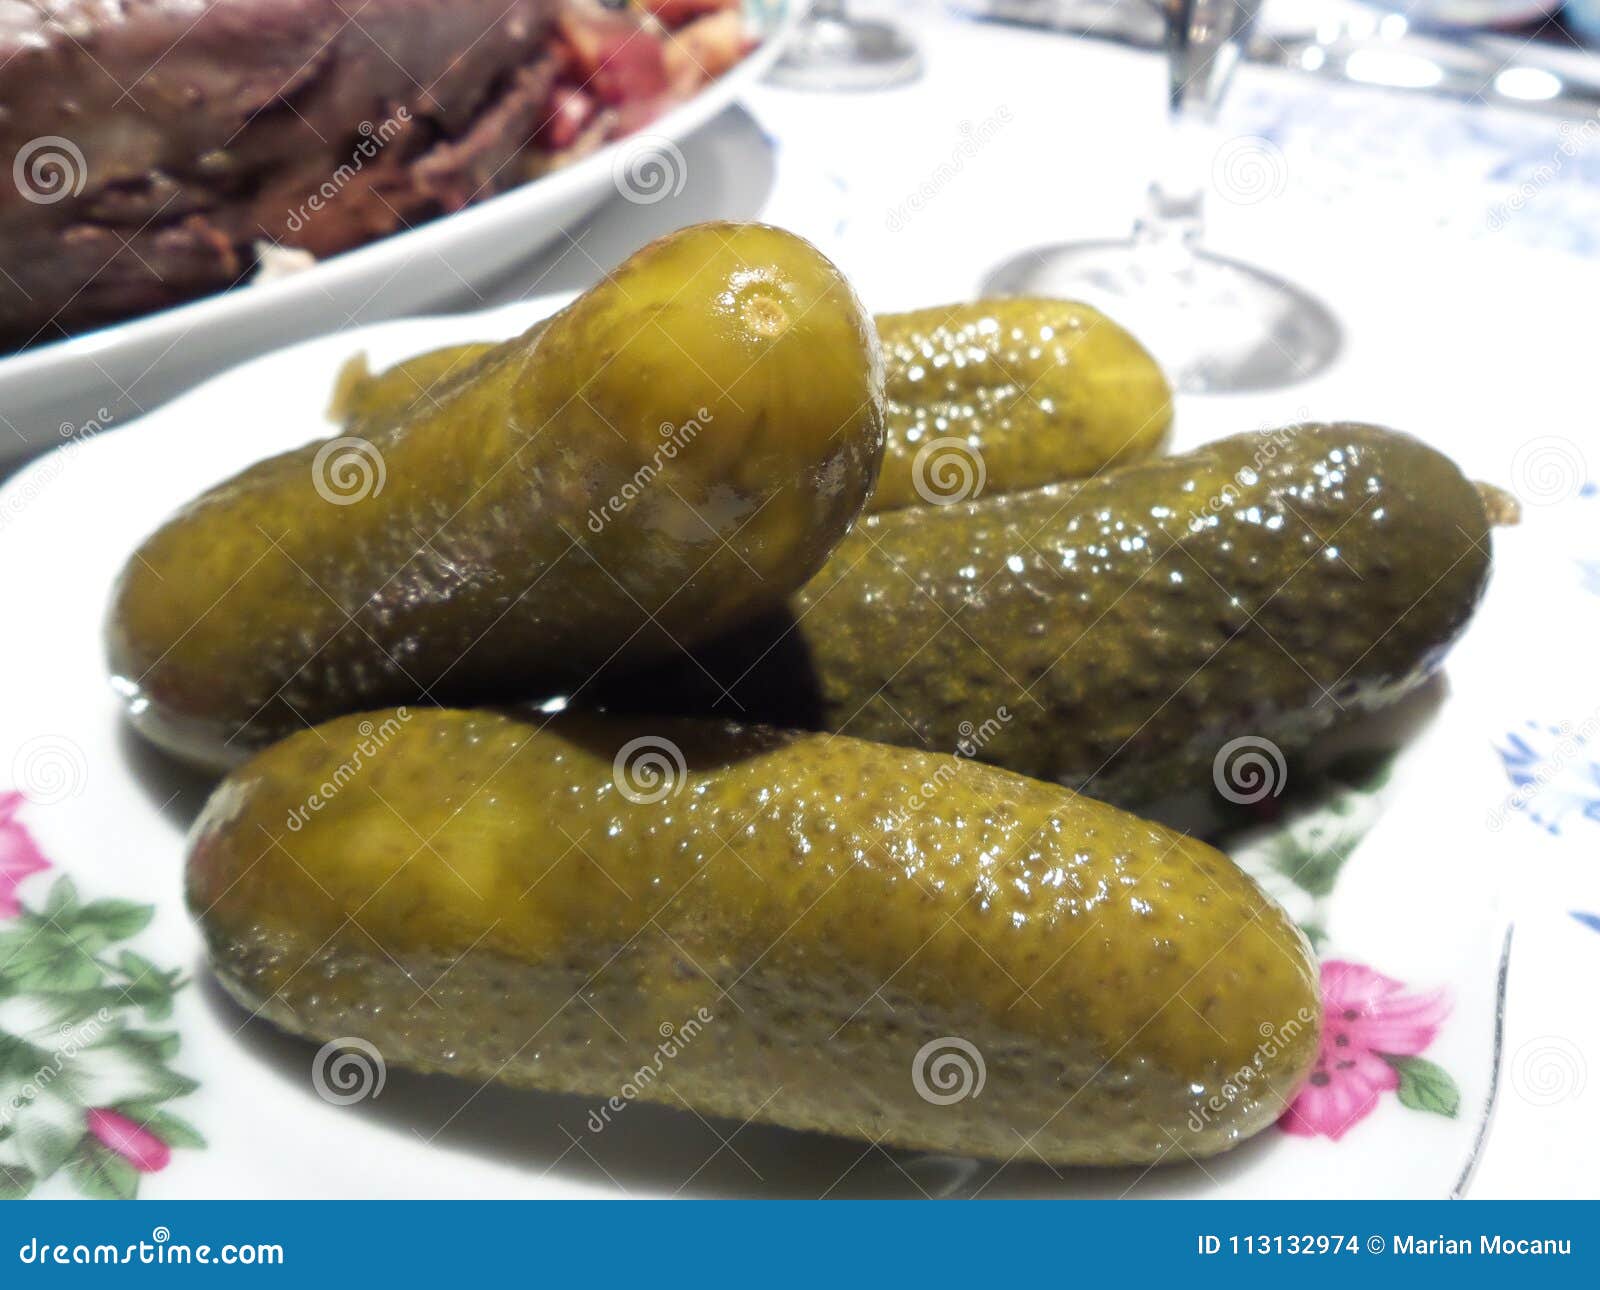 few pickle on a table